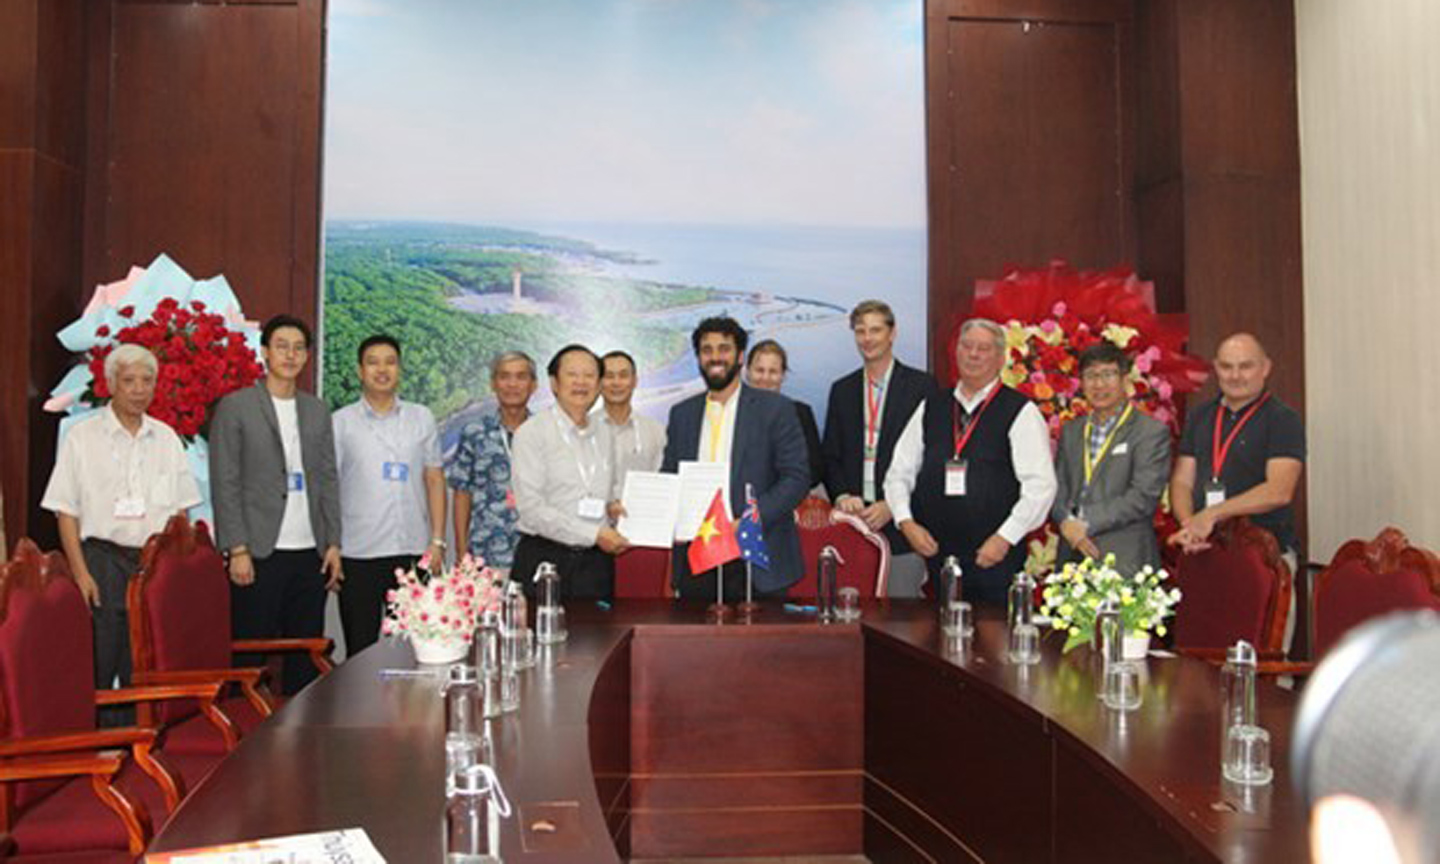 ABO/NDO- The Vietnam Fisheries Society (VINAFIS) and Australia’s Beanstalk Agtech company on March 21 signed a two-year memorandum of understanding on strengthening cooperation in smart agriculture in response to climate change.